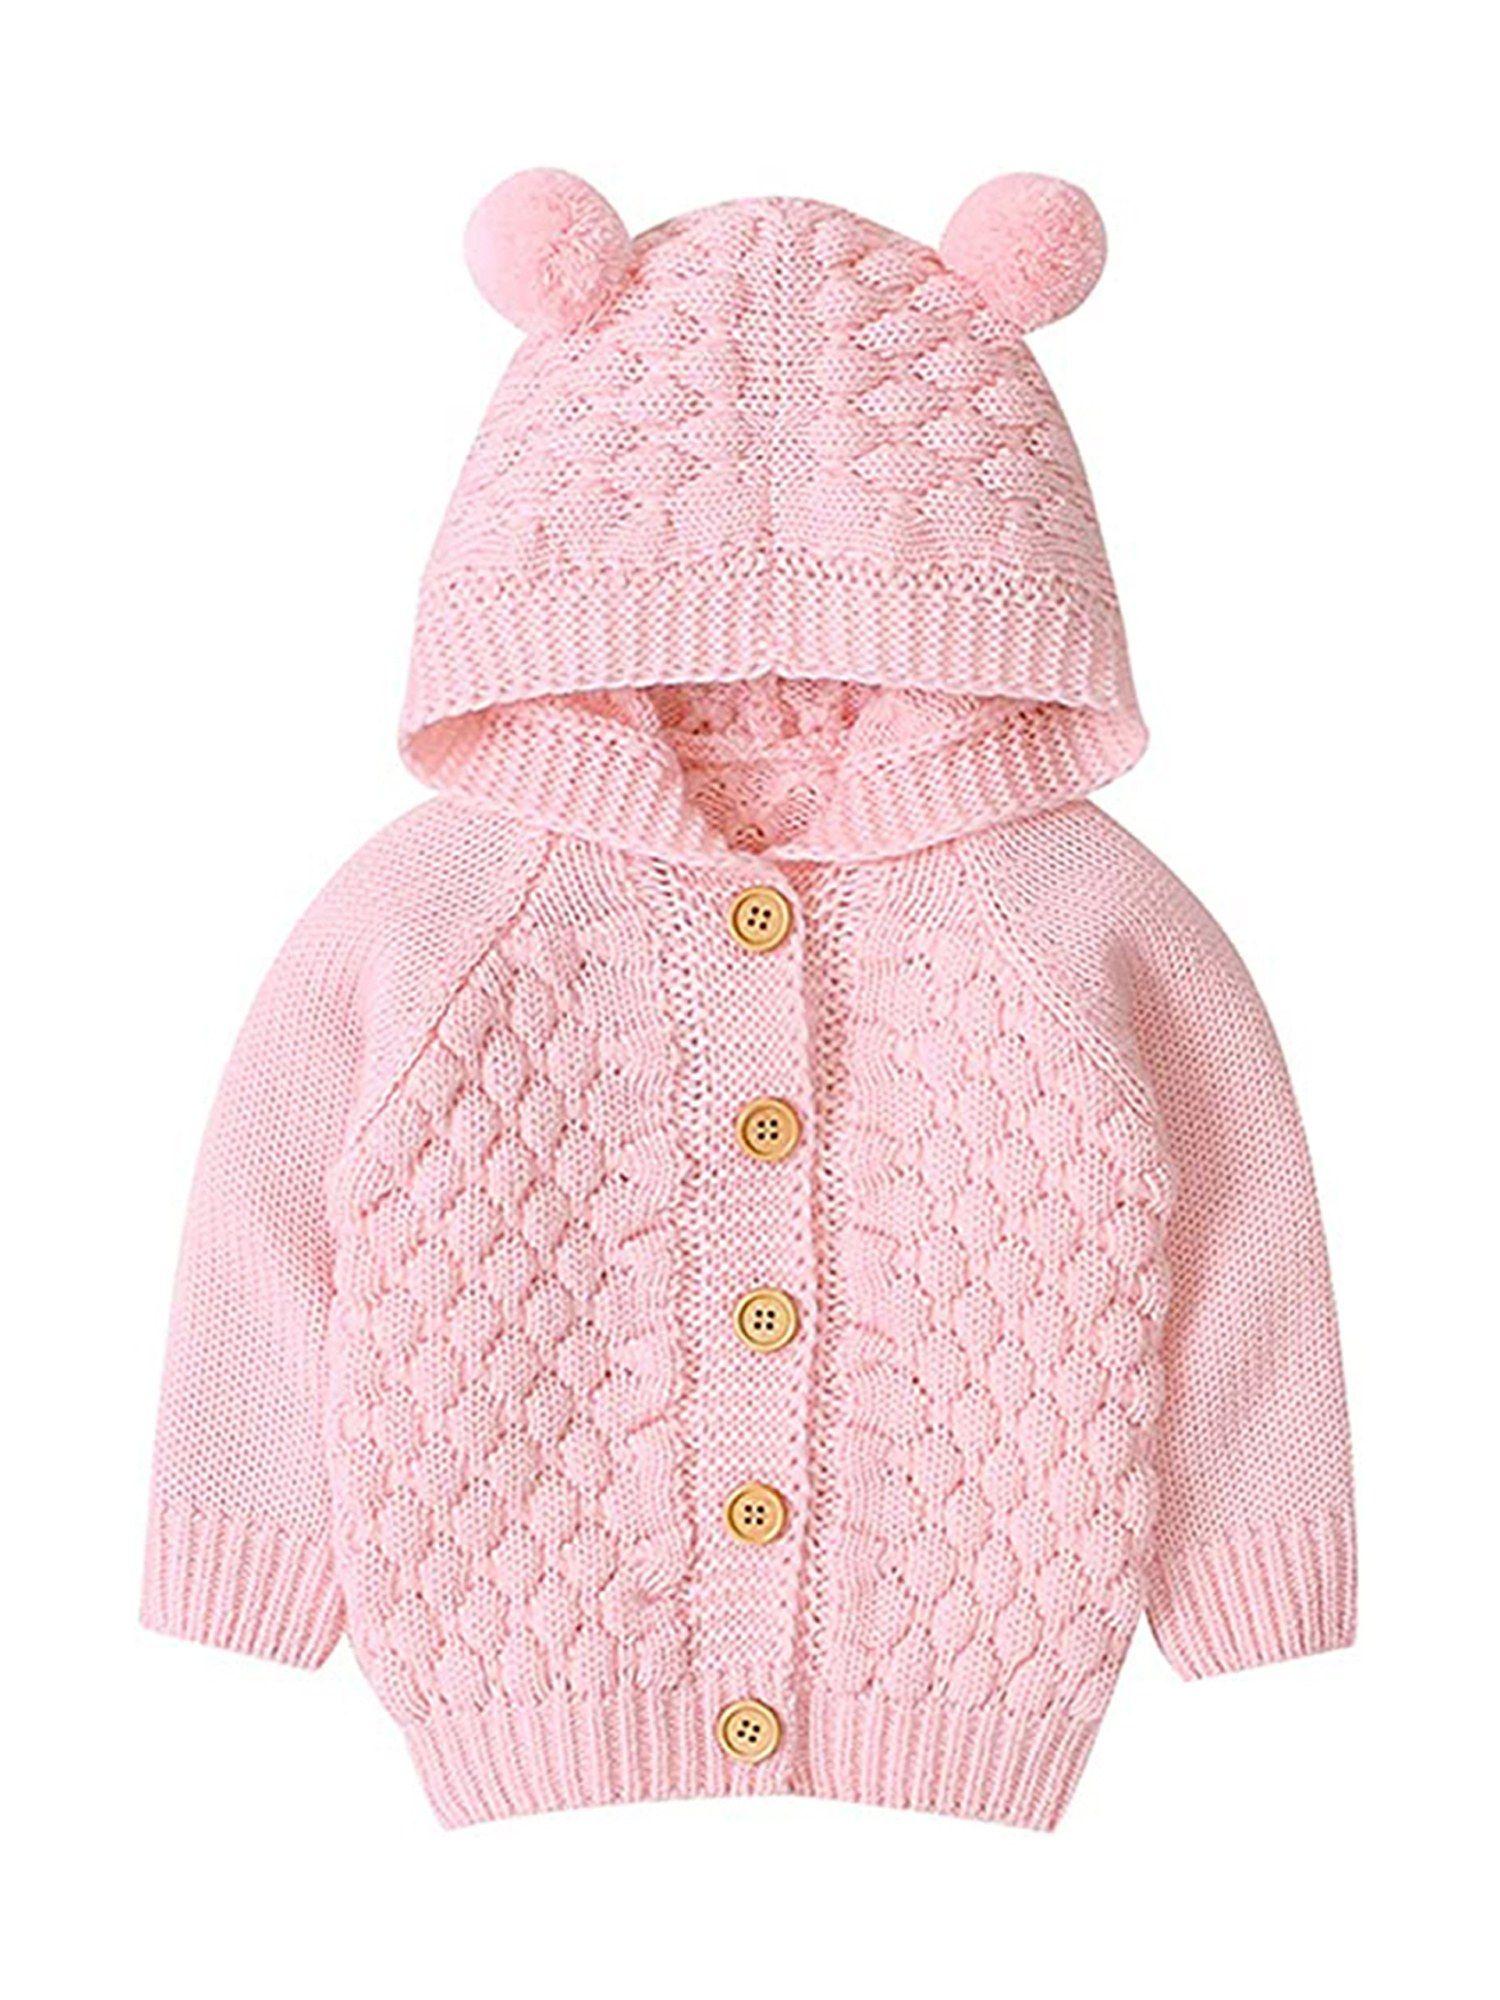 infants baby pink knitted cardigan sweater with pom pom hoodie